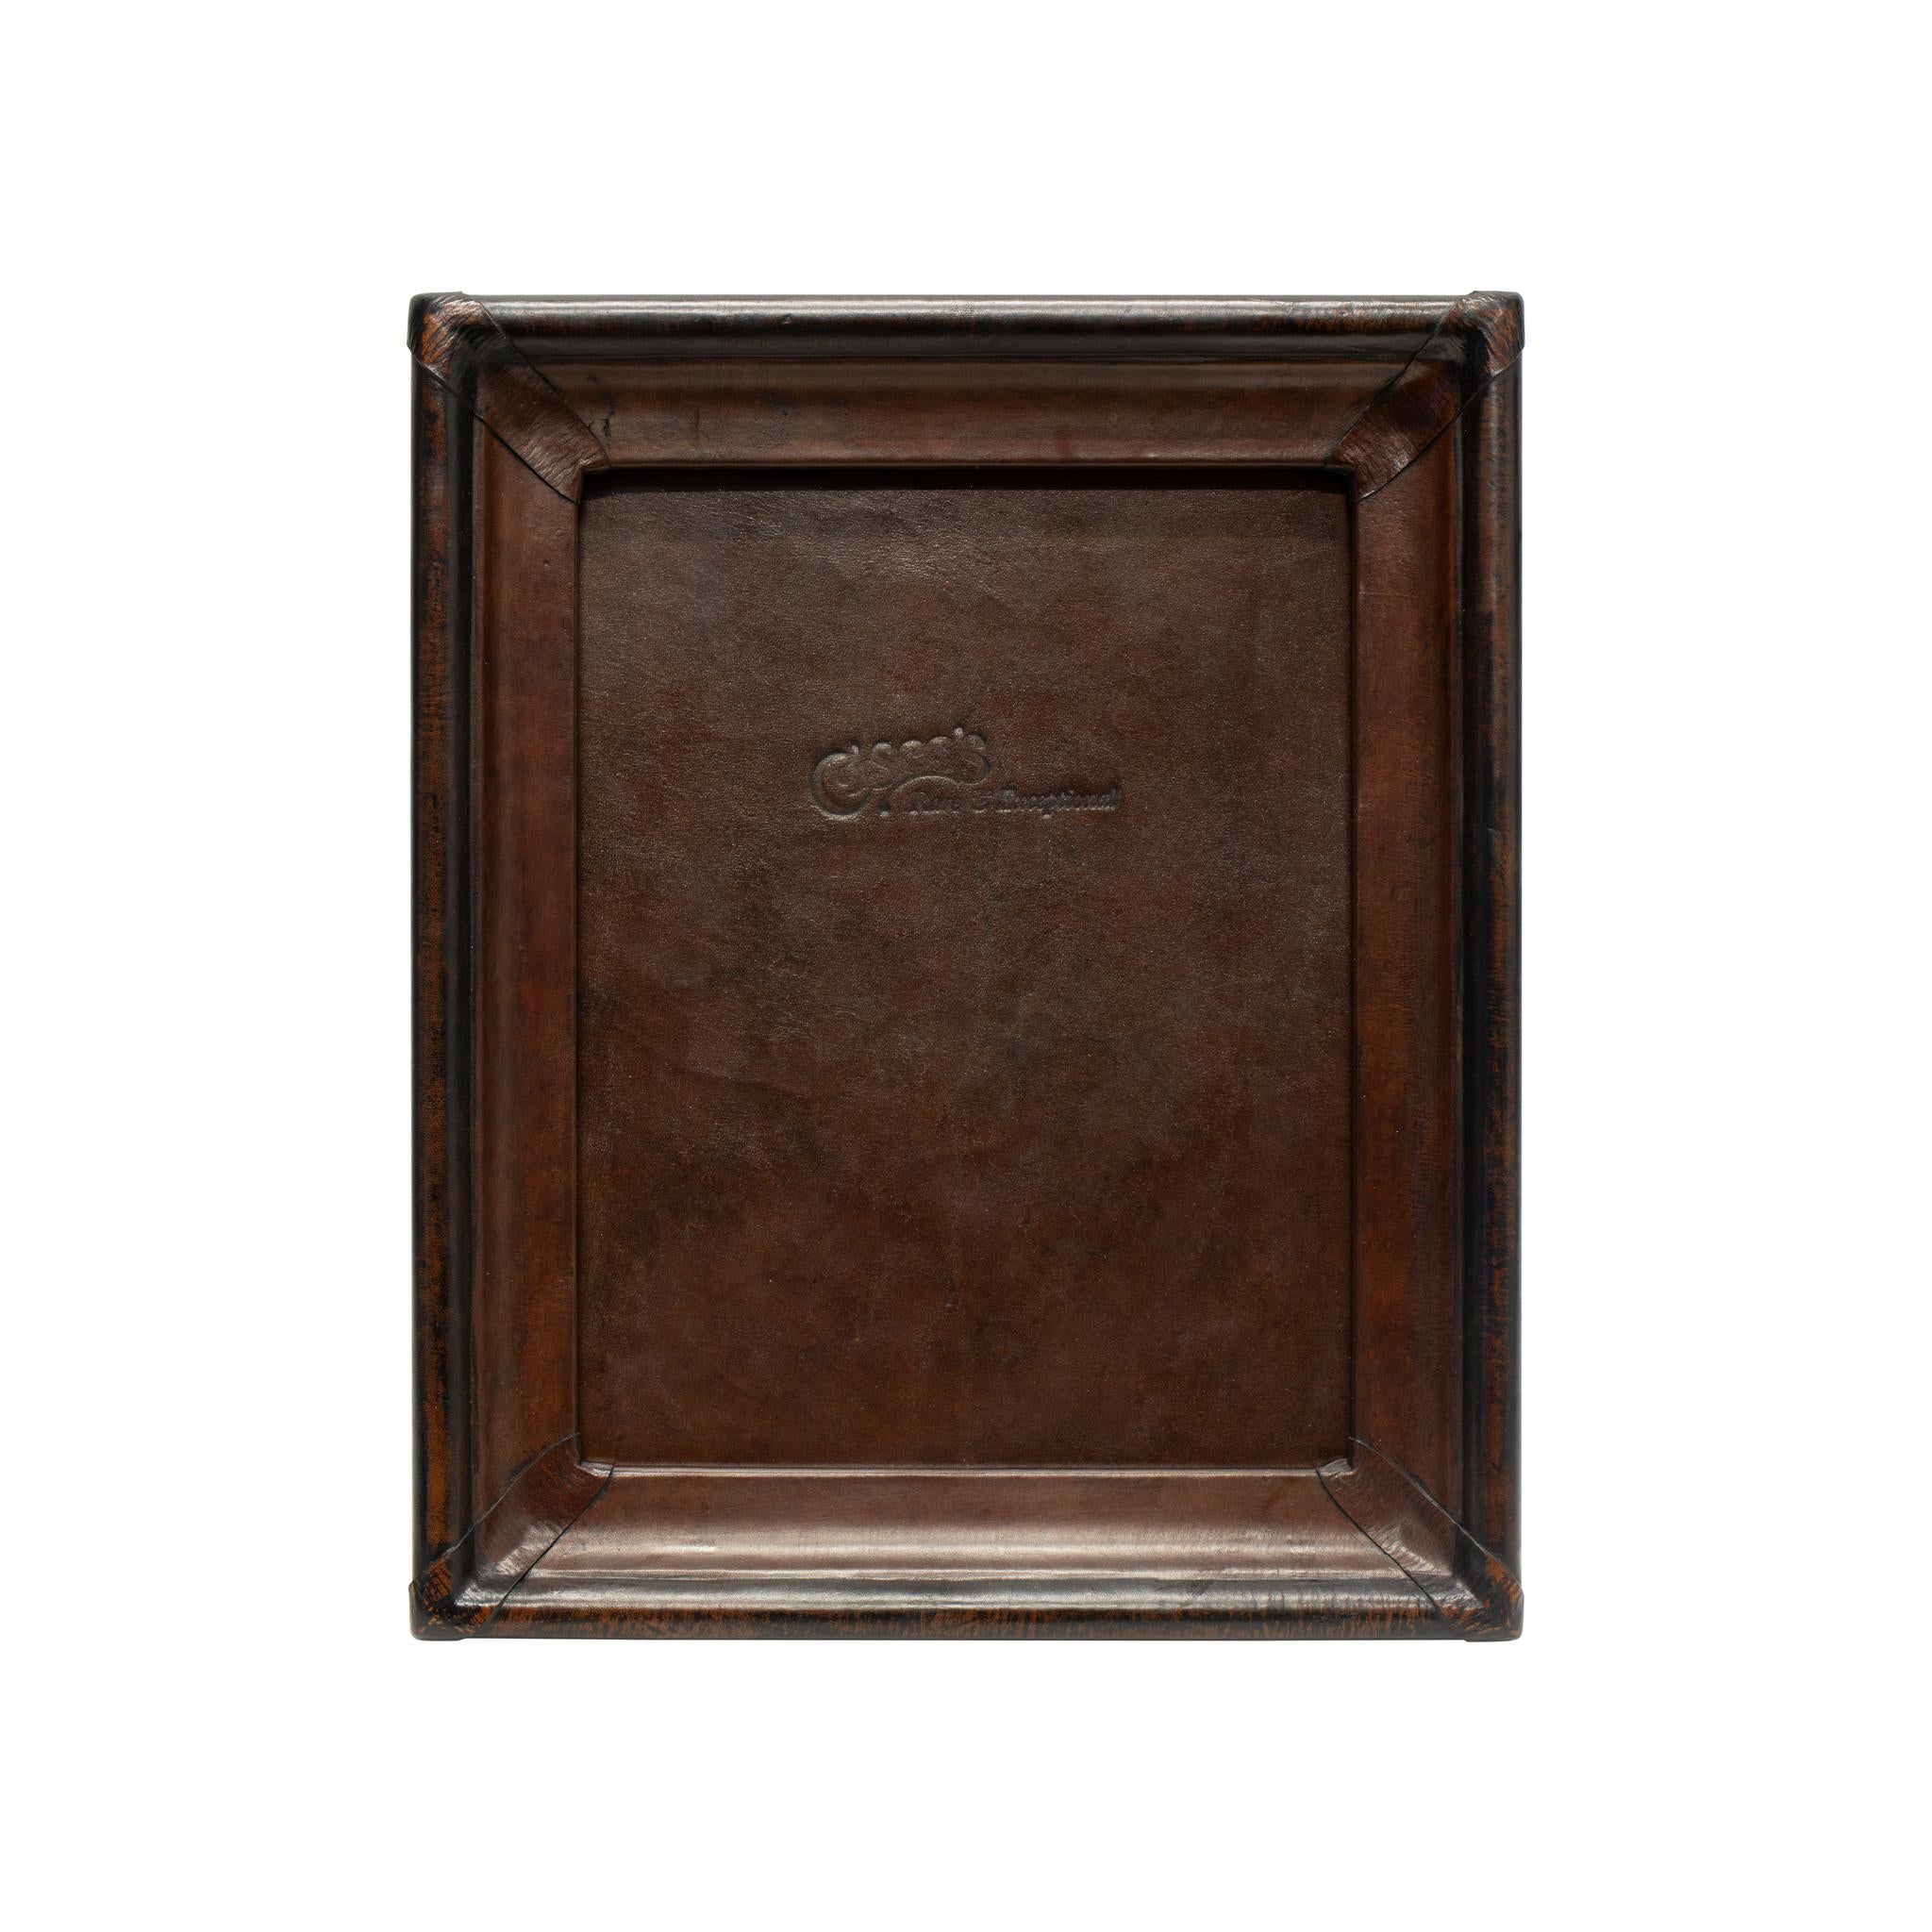 4x6 dark brown & black leather tabletop picture frame. Cisco's premium leather picture frames add the perfect accent to any home or office. Each frame is skillfully crafted by artisan saddle makers using genuine cowhide. Color: Dark brown with